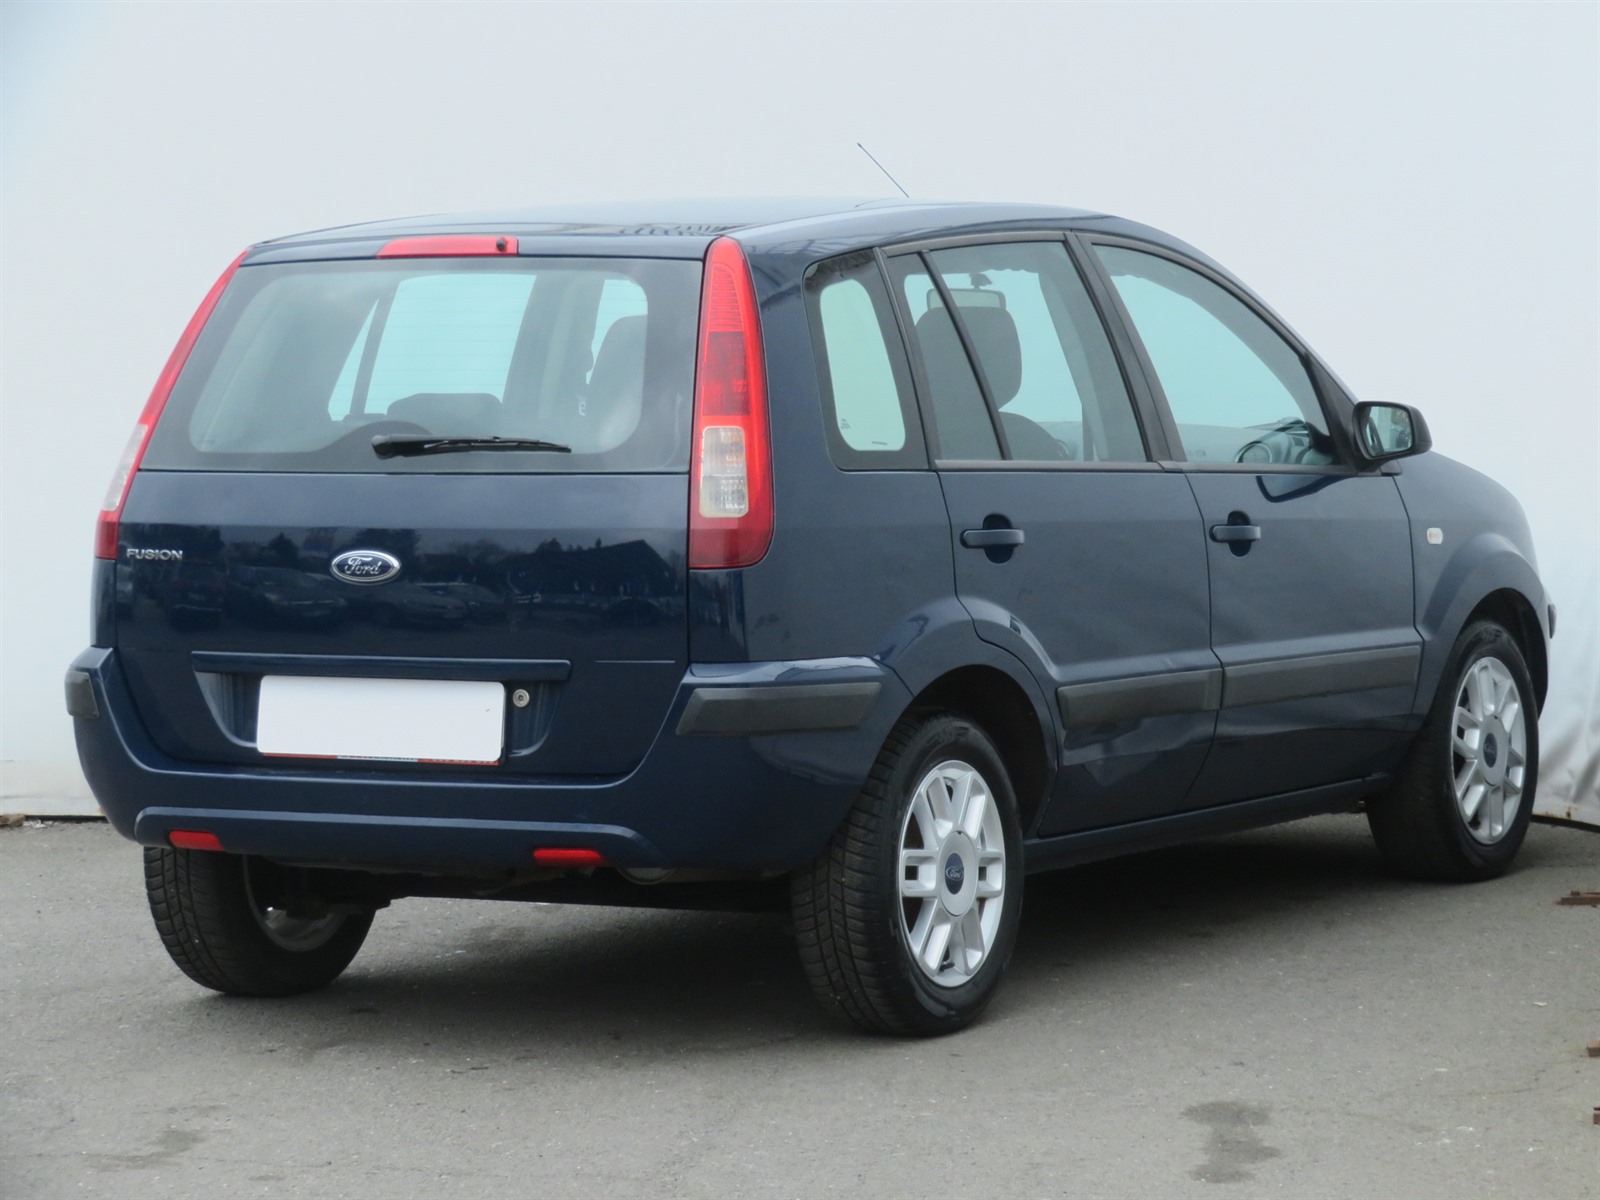 Ford Fusion, 2008 - pohled č. 7